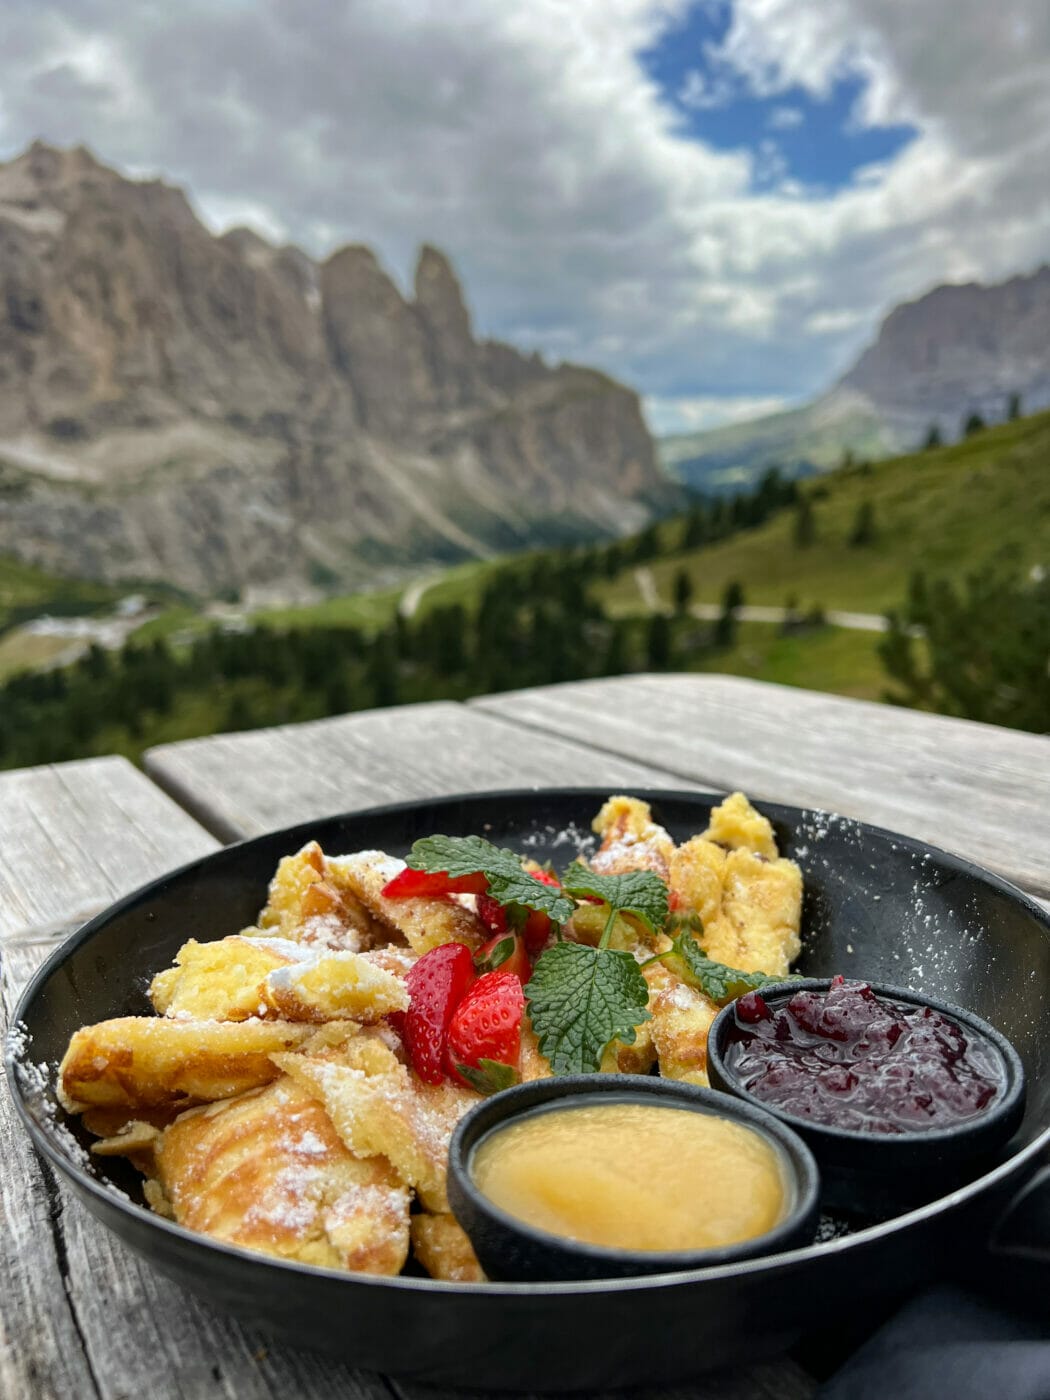 kaiserschmarren a frittata with jam on a rifugio table with the Sella group mountains in the background